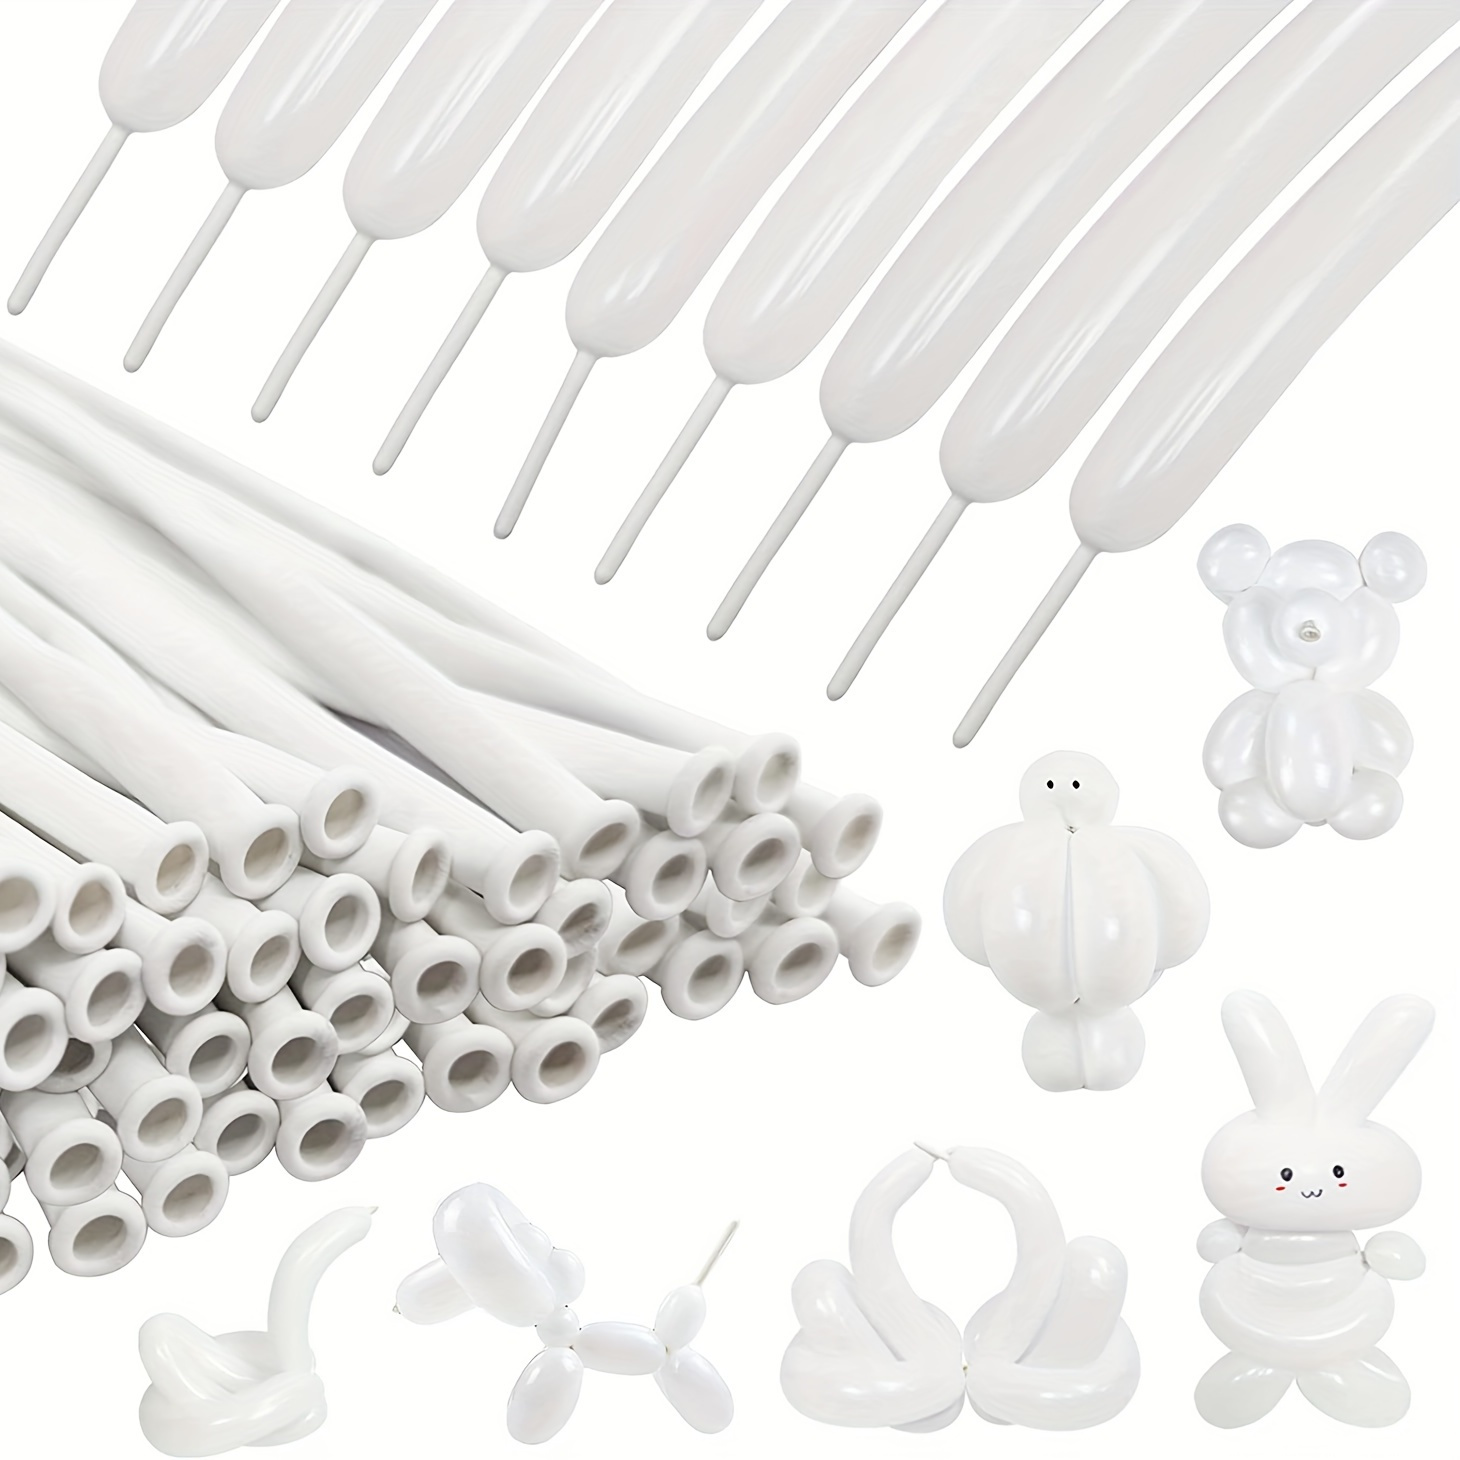 

100pcs, 260 Balloons White Long Balloons For Balloon Garland Thickening Skinny Latex Twisting Balloon For Animals Modeling Christmas Birthday Wedding Party Decorations